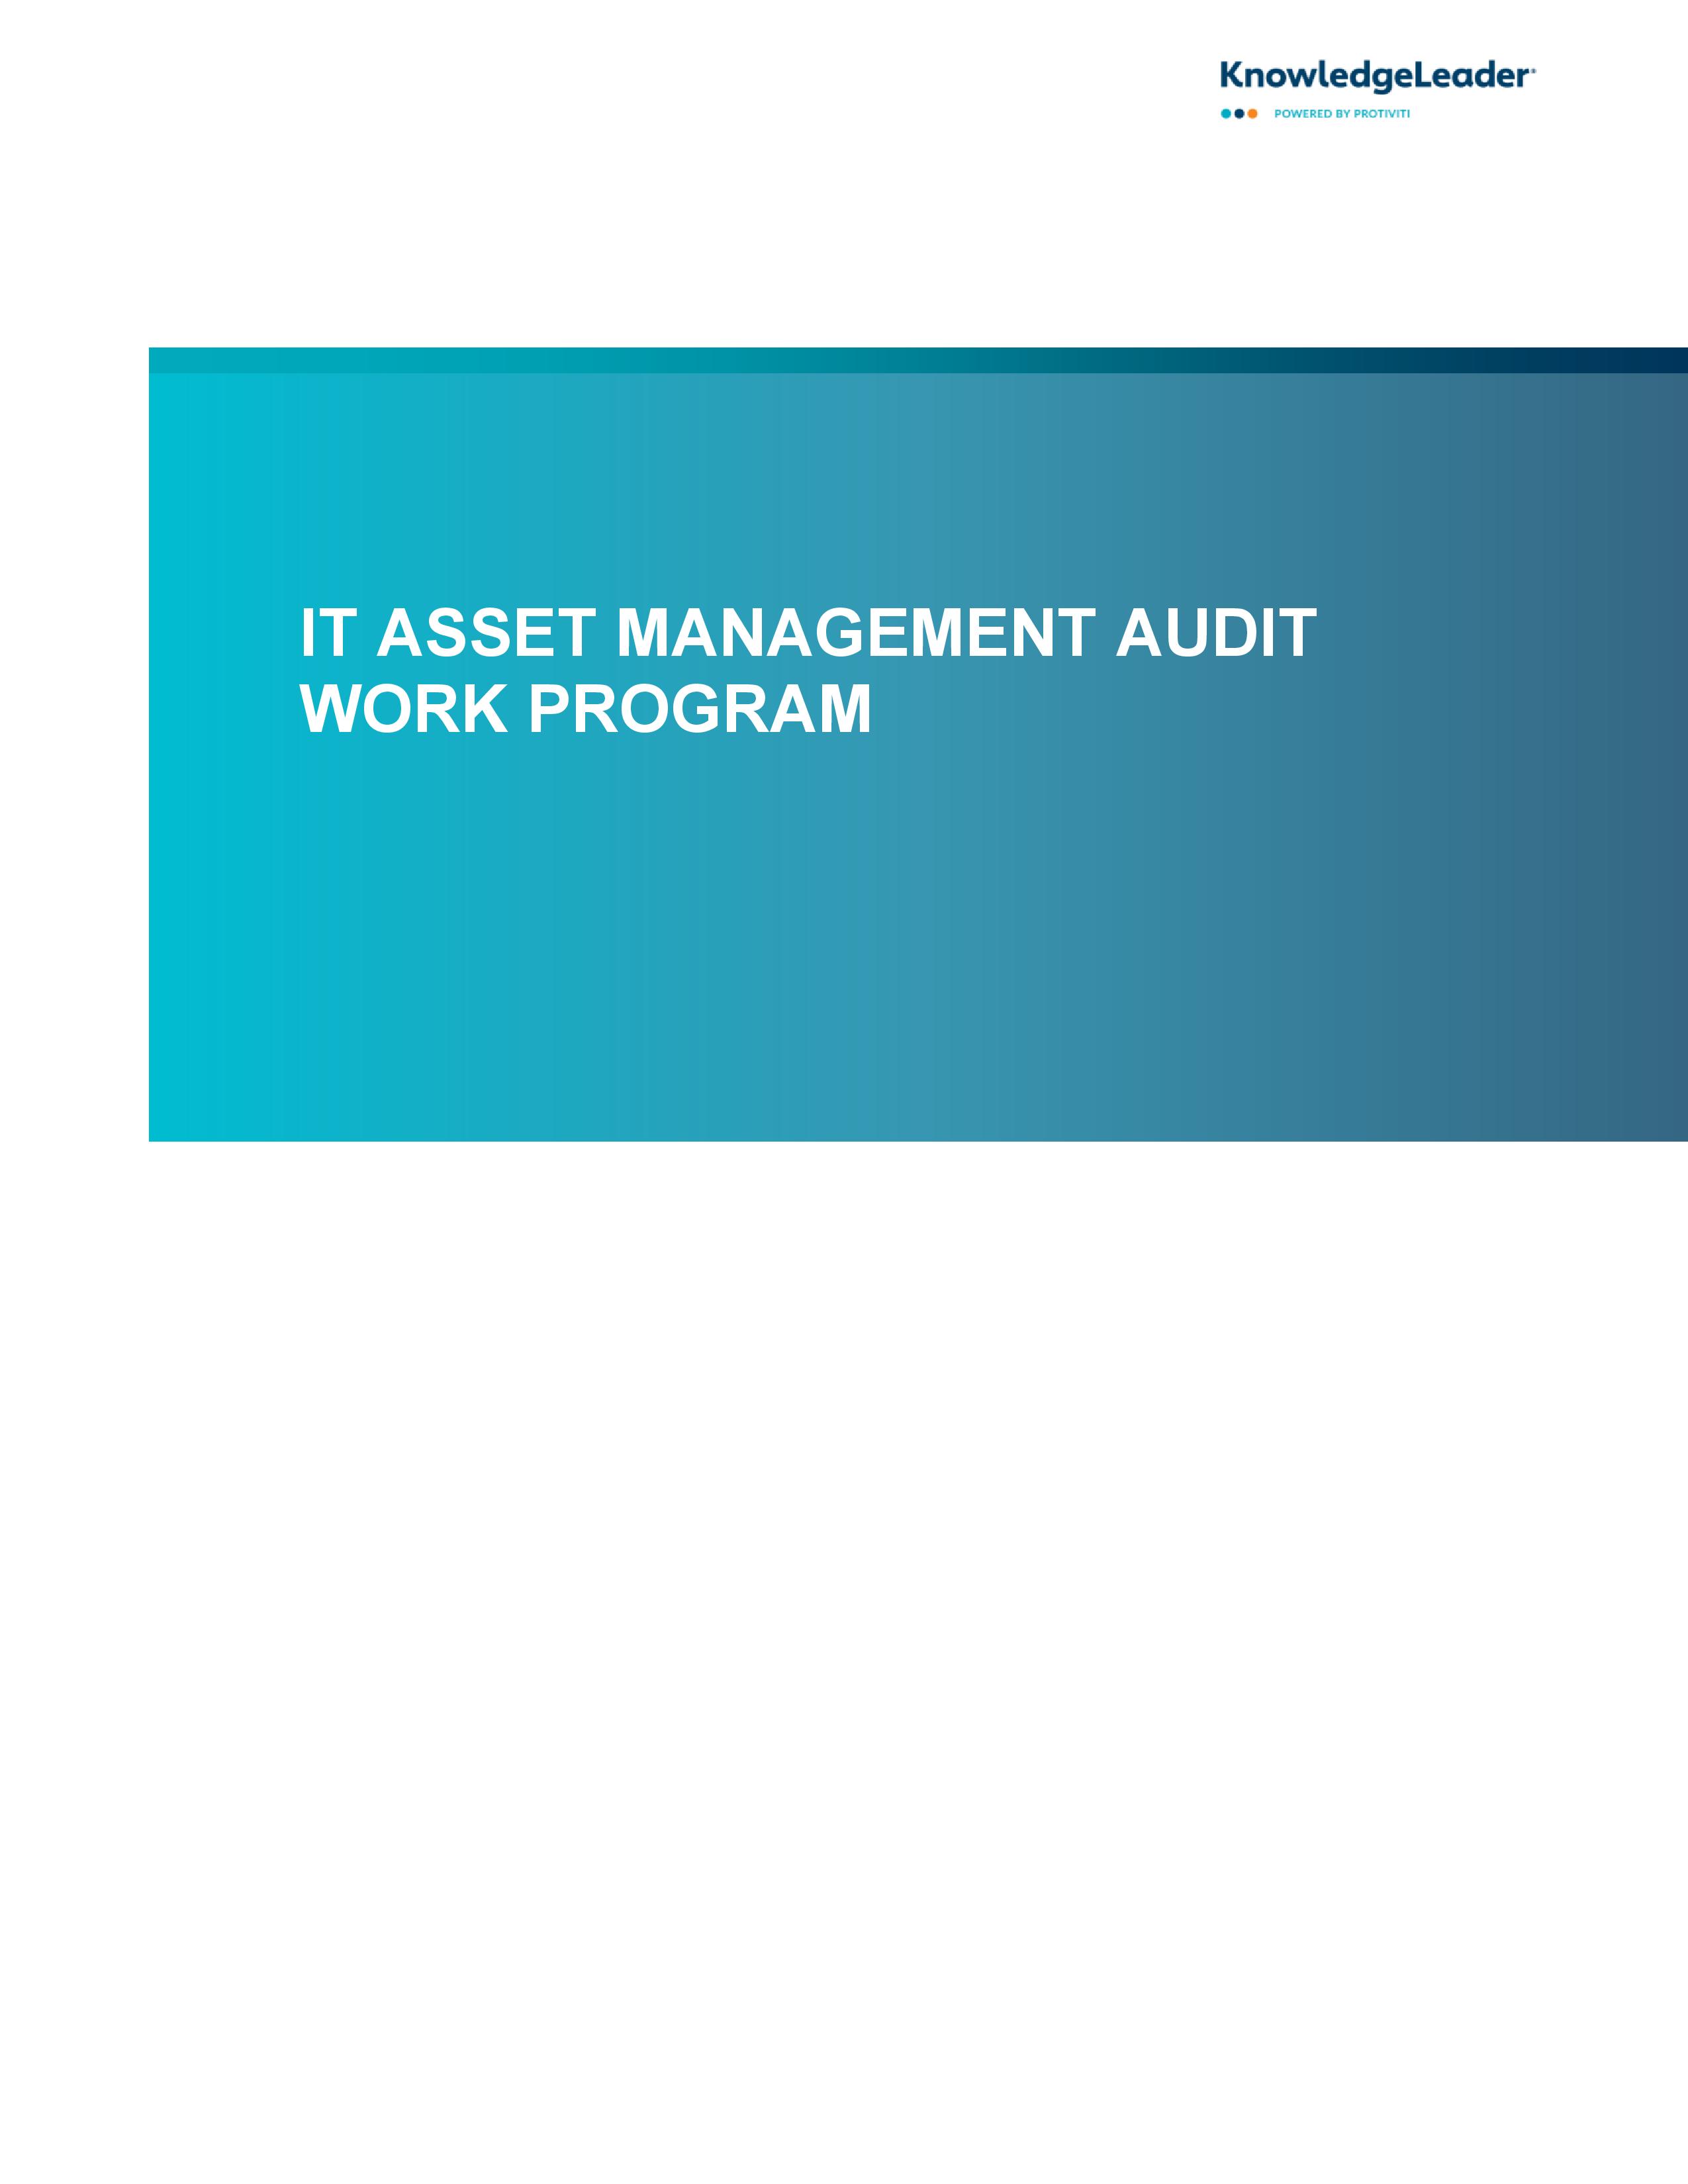 screenshot of the first page of the IT Asset Management Audit Work Program